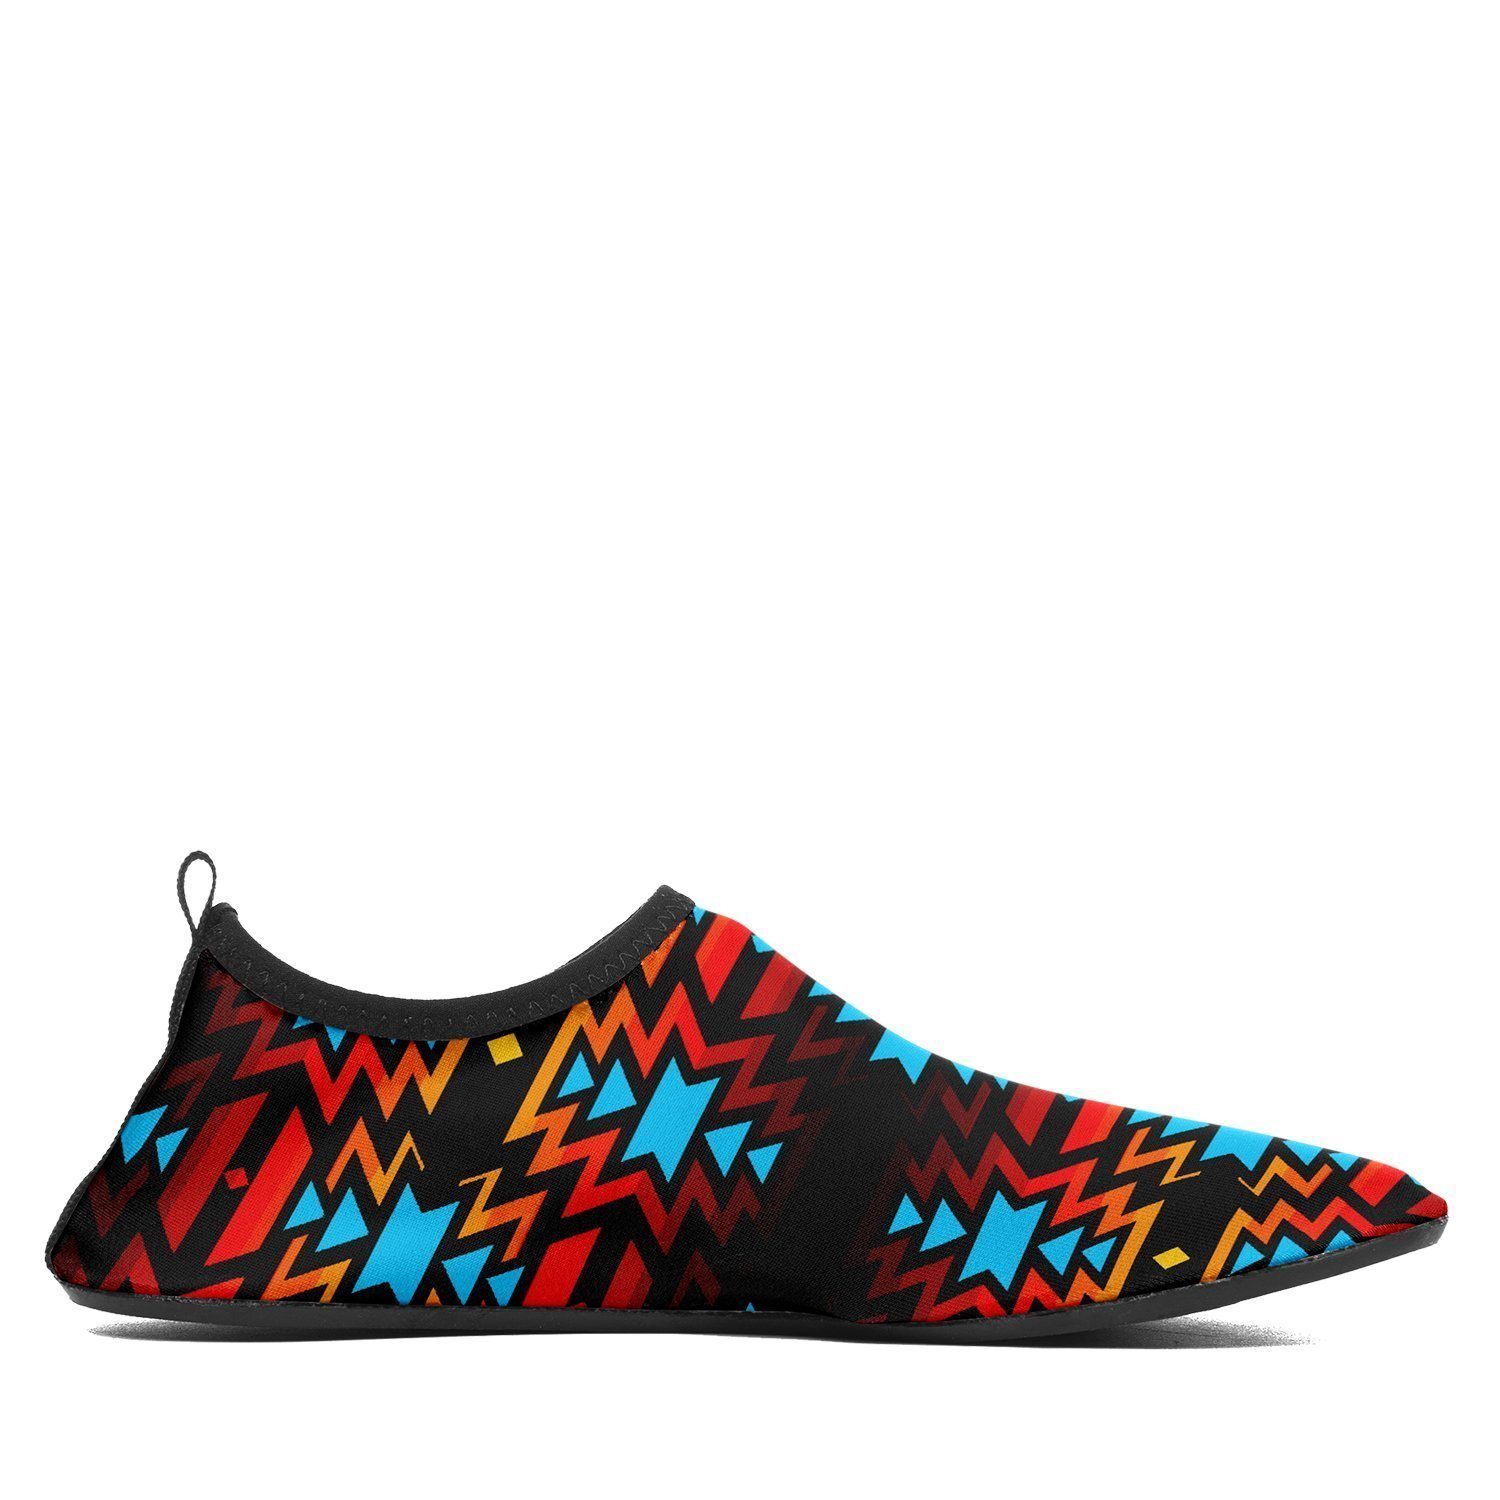 Black Fire and Turquoise Sockamoccs Kid's Slip On Shoes 49 Dzine 